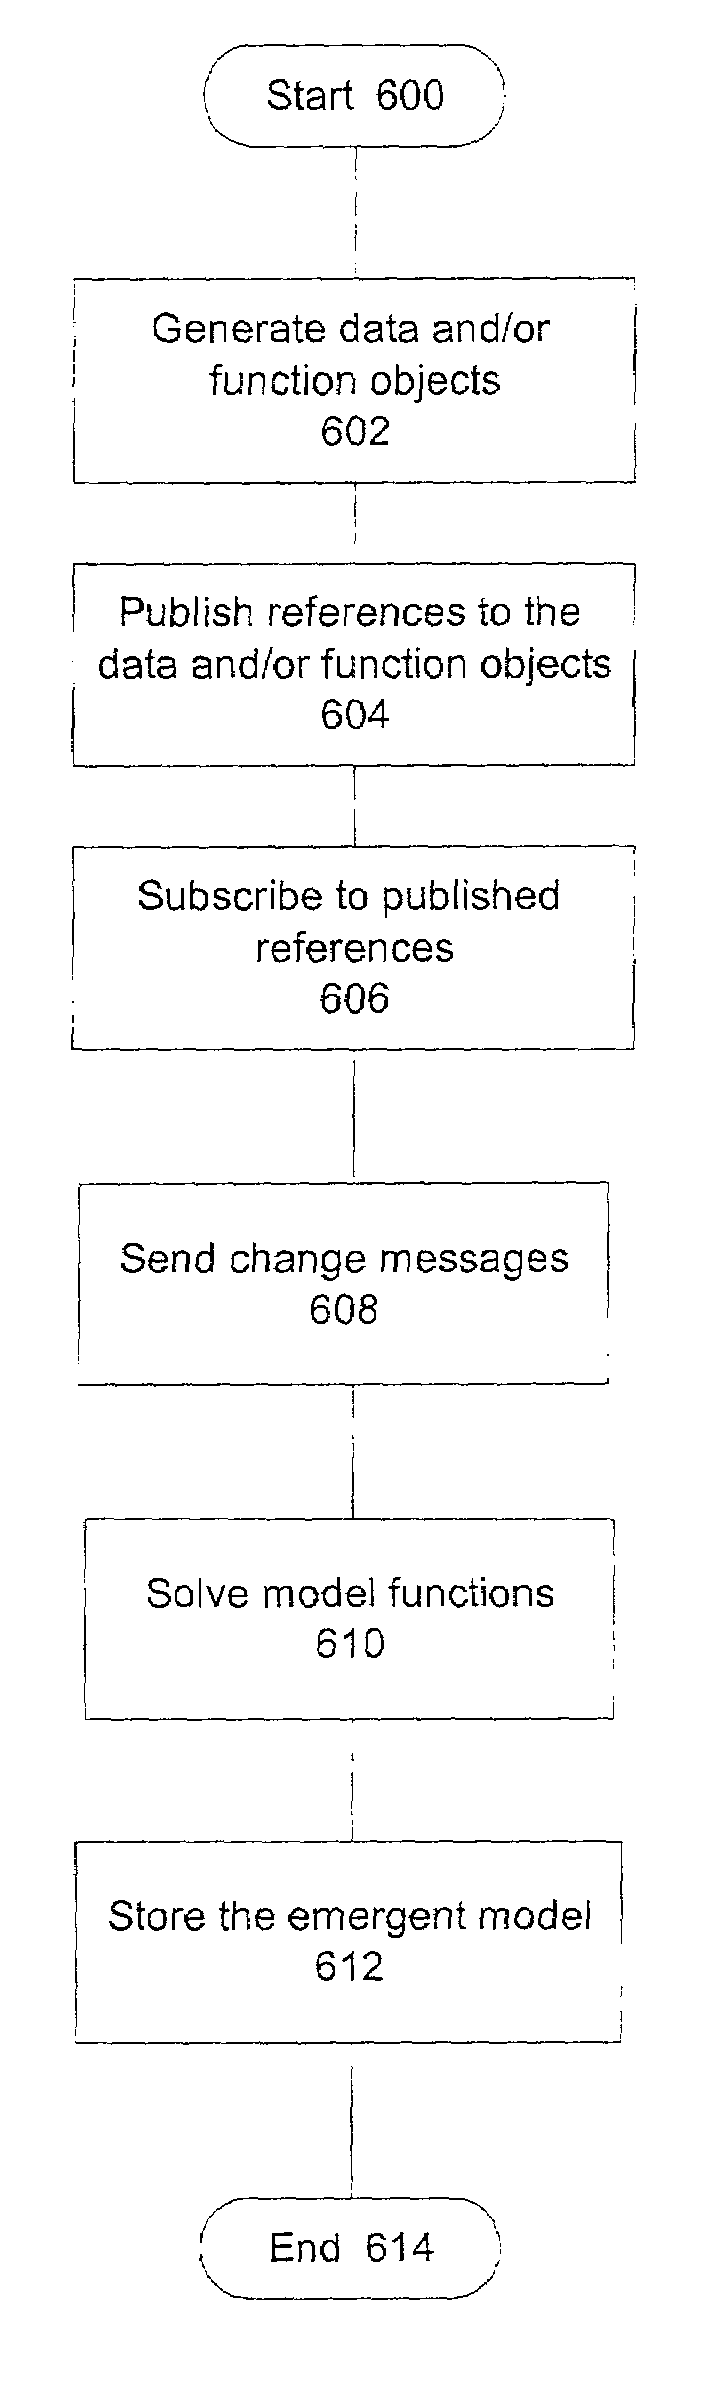 Method and apparatus for generating an emergent model on a computer network